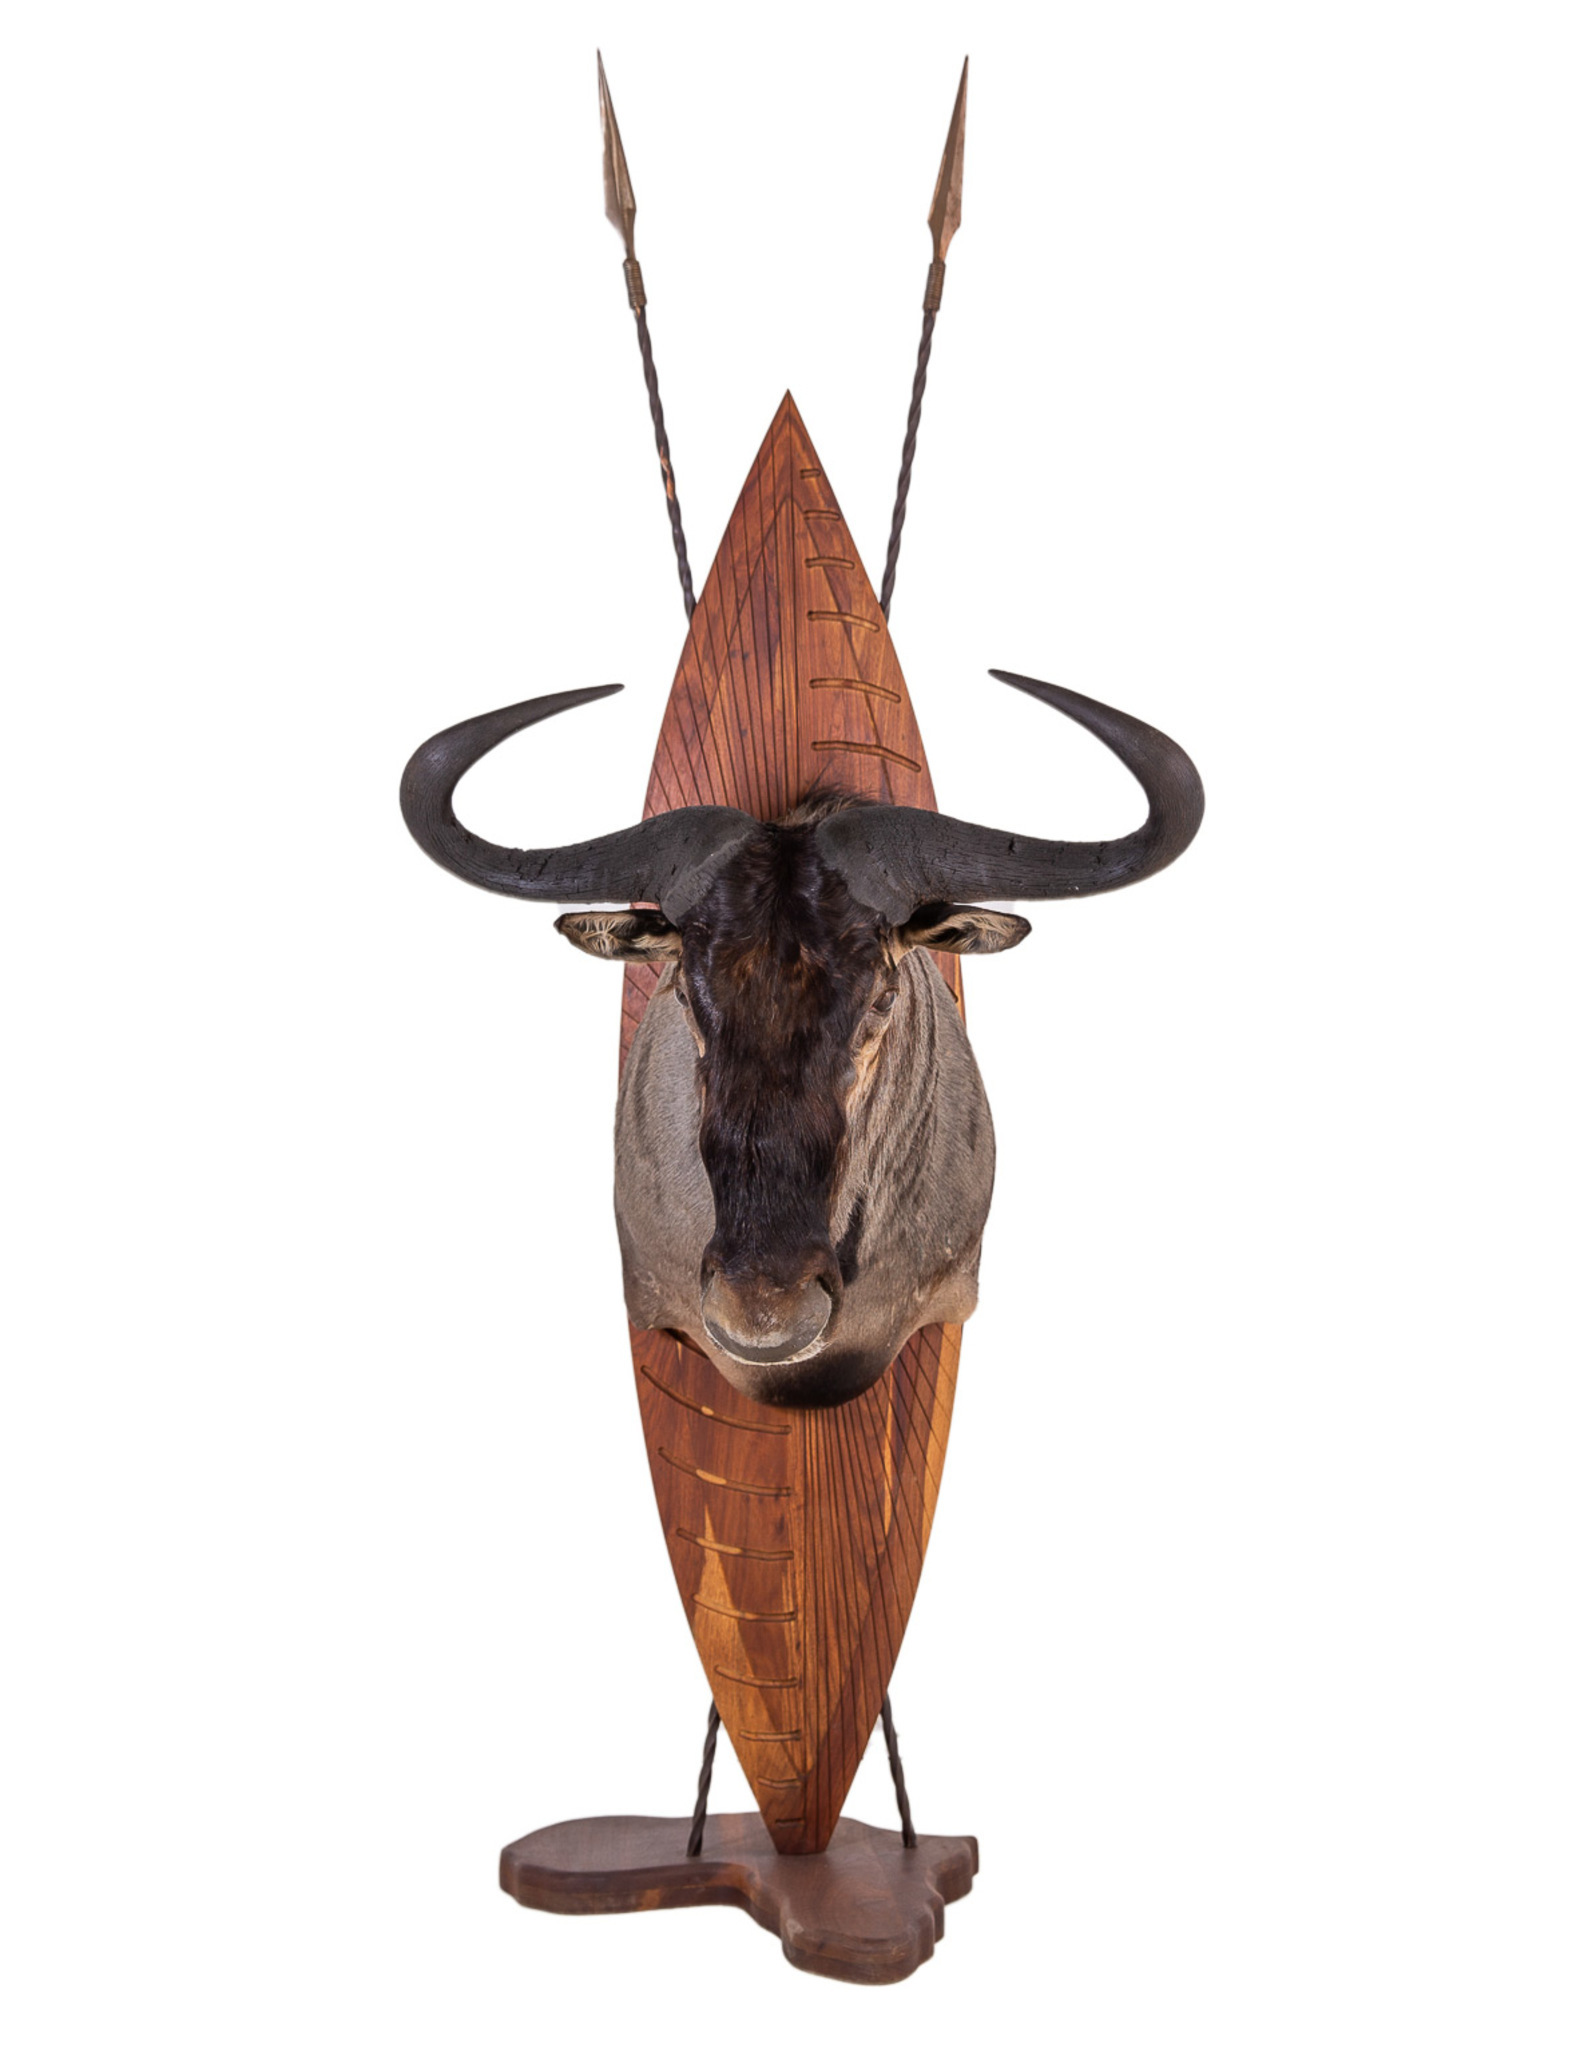 Splitting Image - Taxidermist - BLUE WILDEBEEST - Shoulder mount 1-8 right turn on traditional Zulu shield and spears